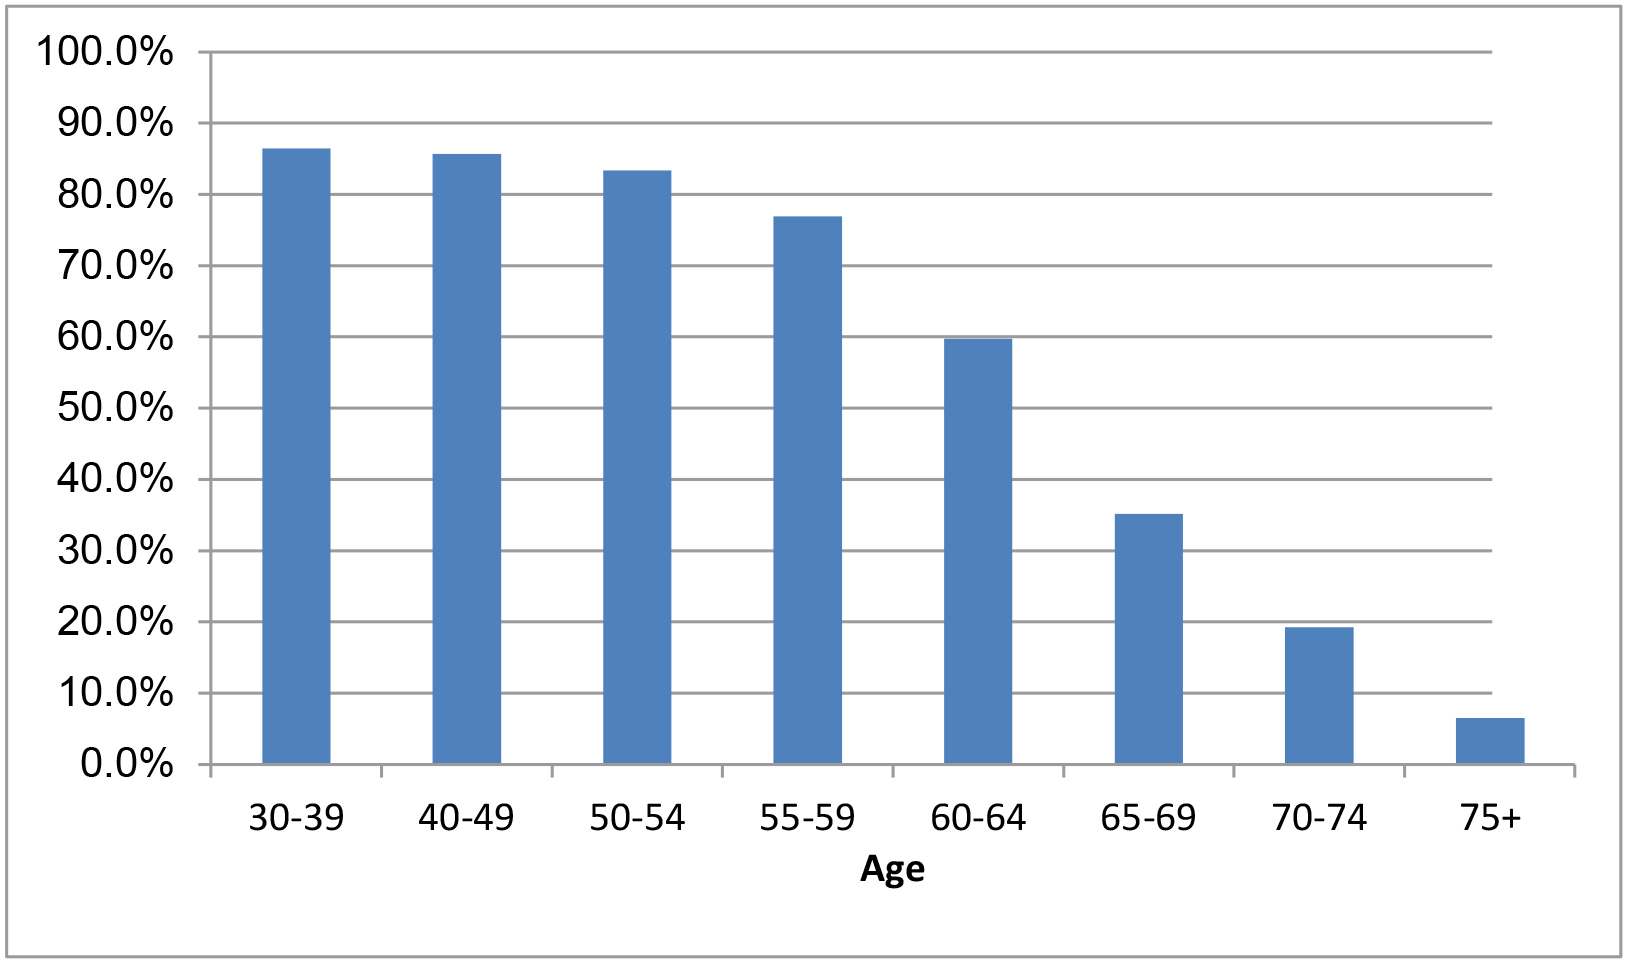 Bar graph showing the employment rates by age group in 2014. Text version below.